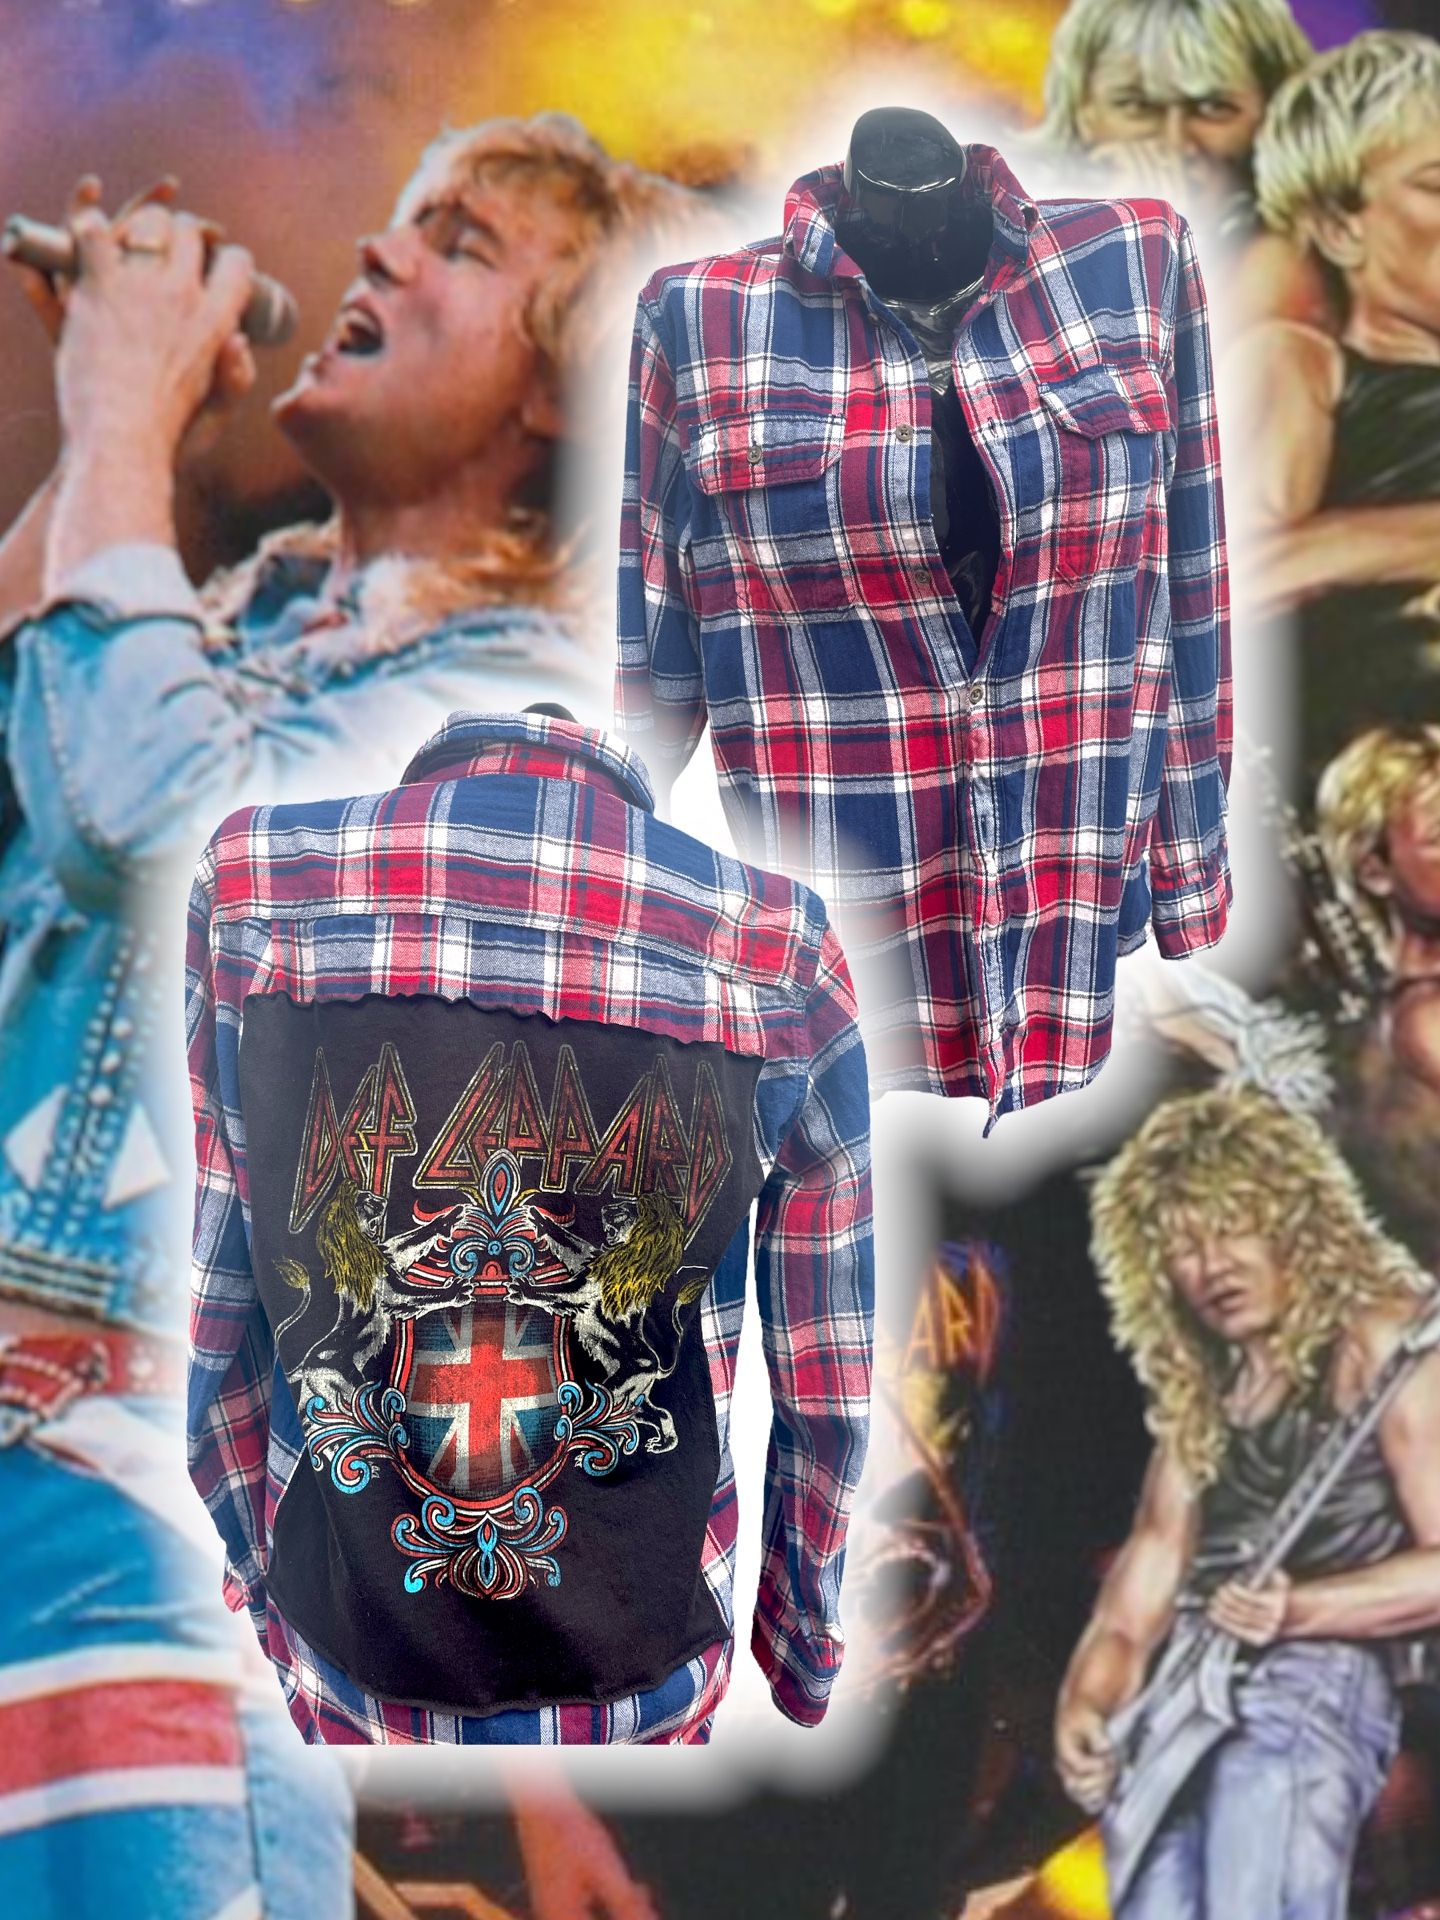 Def Leppard “Rock of Ages” Plaid Button Up Shirt SMALL • Upcycled / Repurposed Gift for him • Rock & Roll • Band Tee